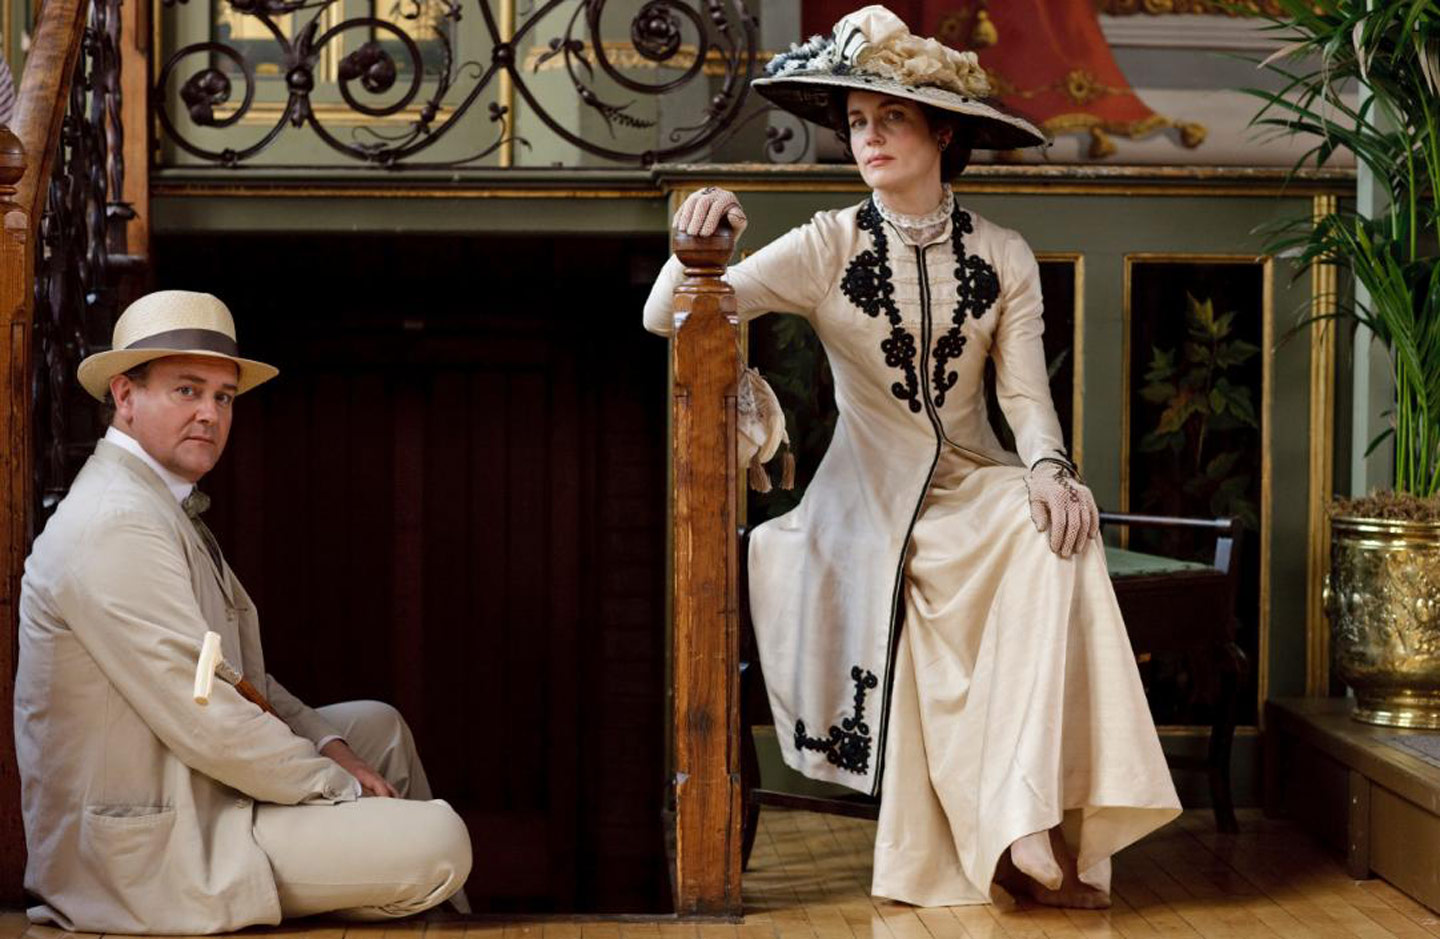 Lady Crawley’s “Downton Abbey” character was based on the ladies of America’s Gilded Age. 